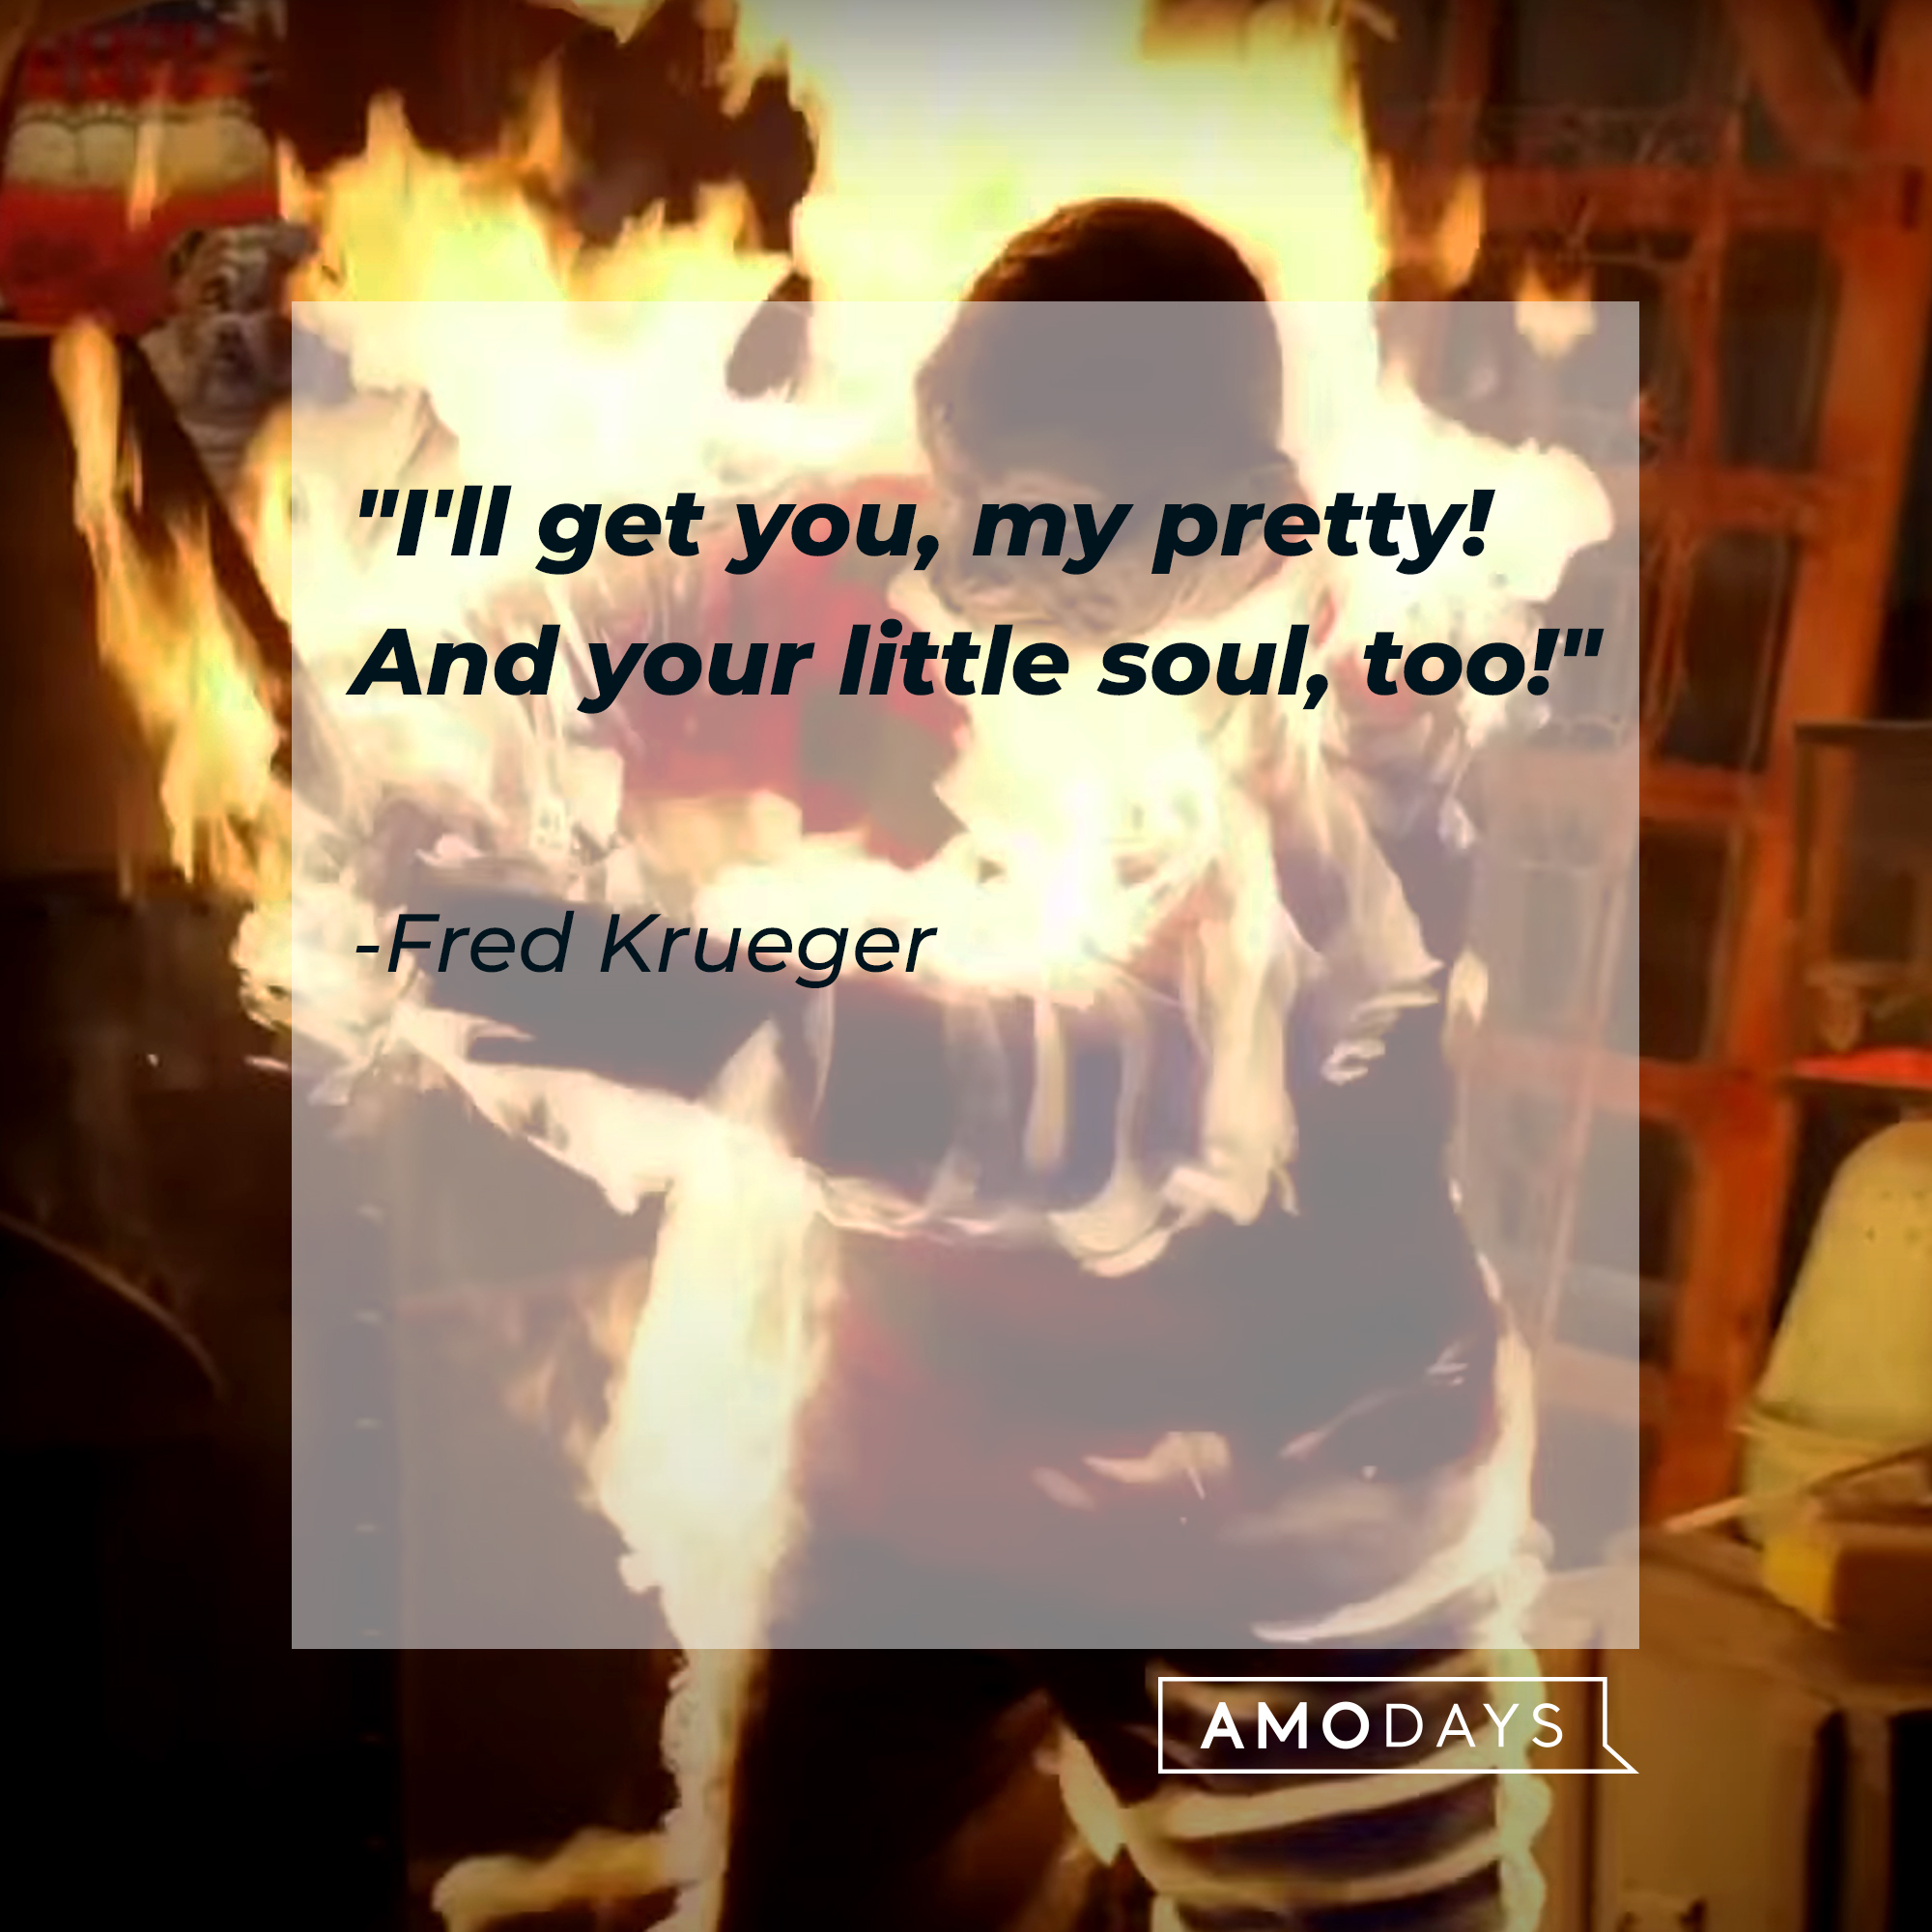 Freddy Krueger's quote:  "I'll get you, my pretty! And your little soul, too!" | Source: Facebook/ANightmareonElmStreet